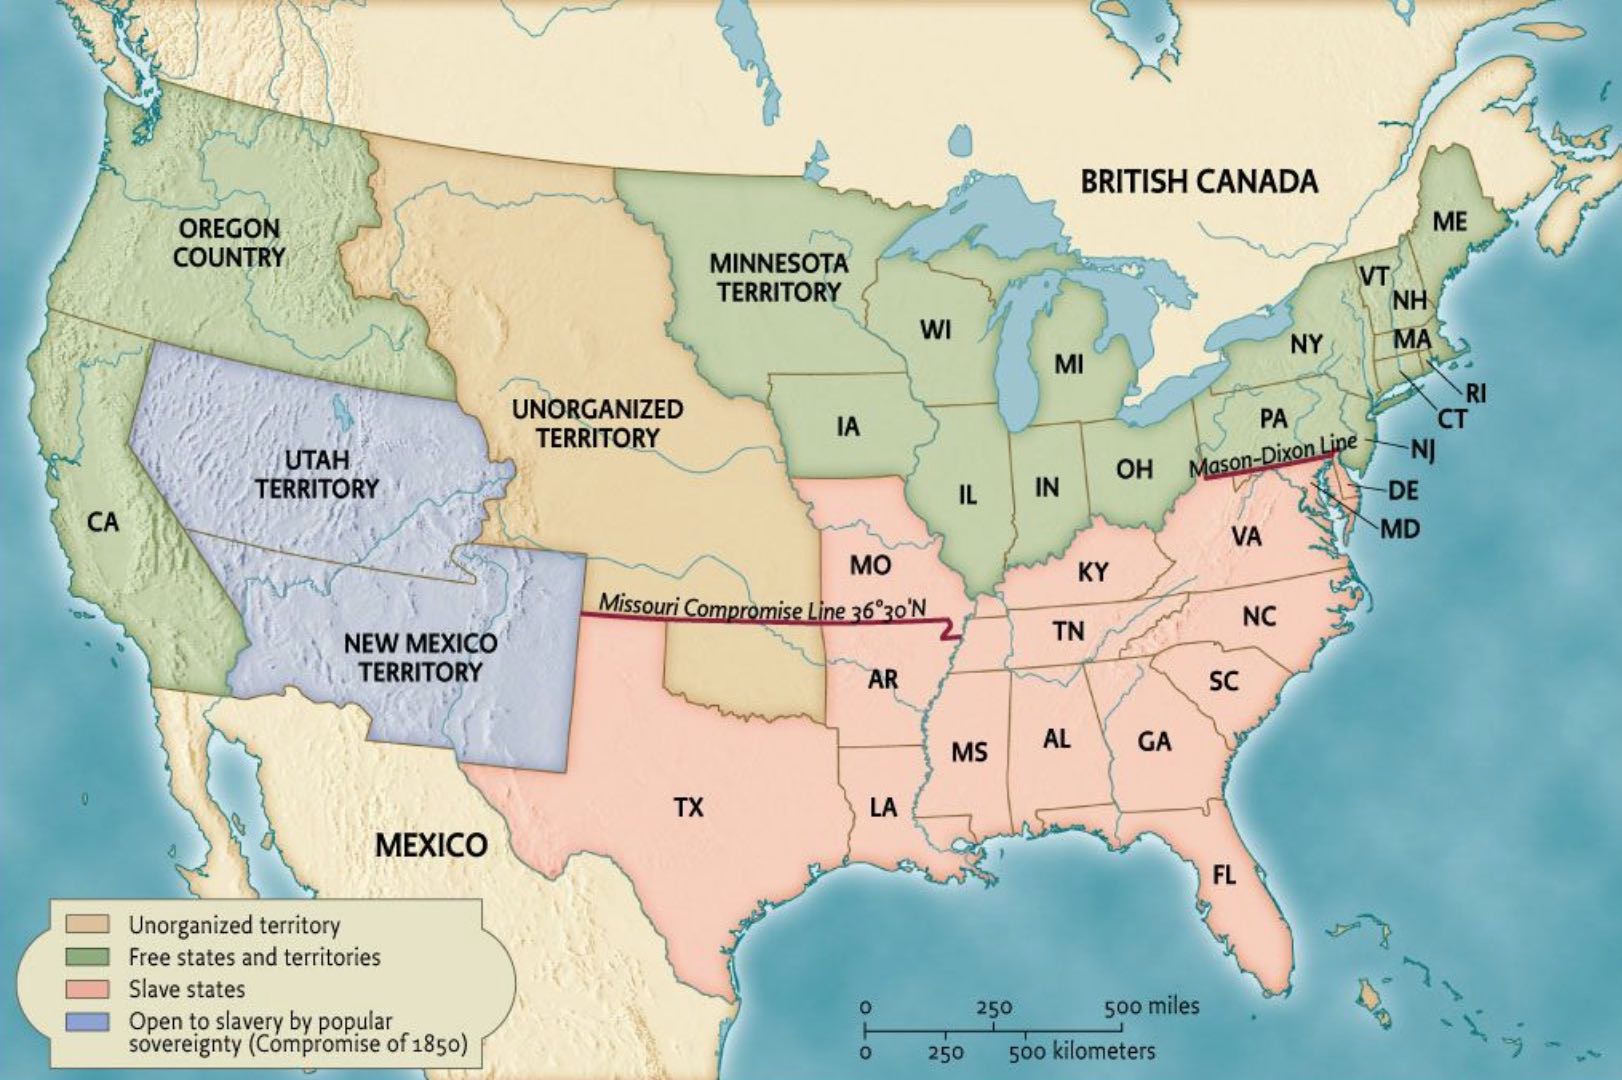 The Missouri Compromise line runs through the
far northern parts of Oklahoma, New Mexico and Arizona, the far southern part of Nevada, and right through the middle of California